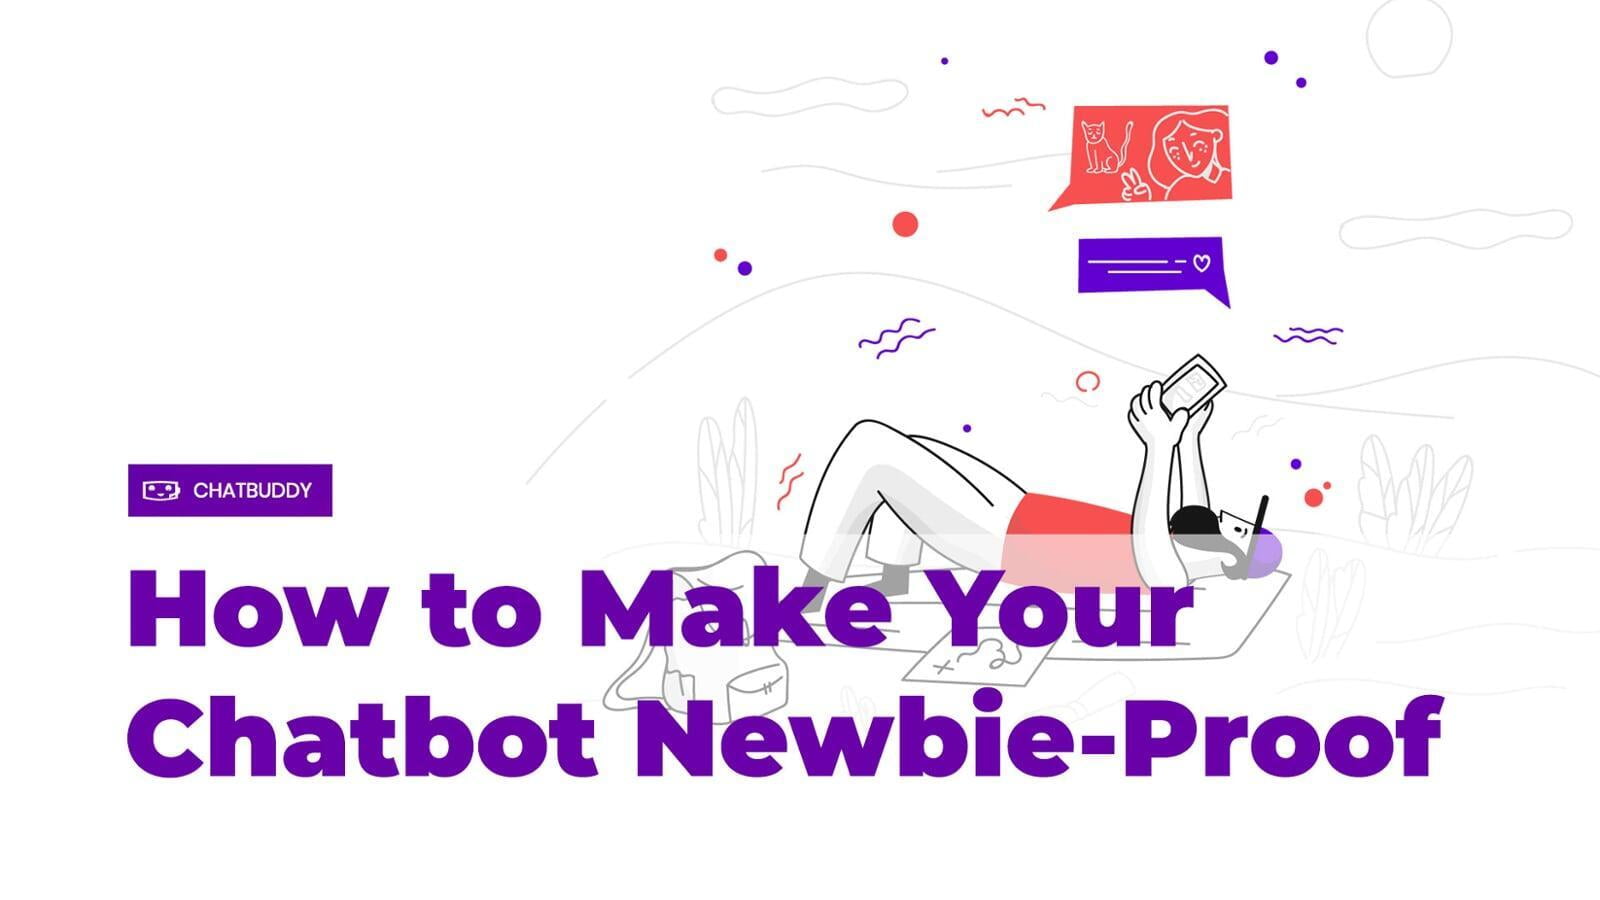 How to Make Your Chatbot Newbie-Proof